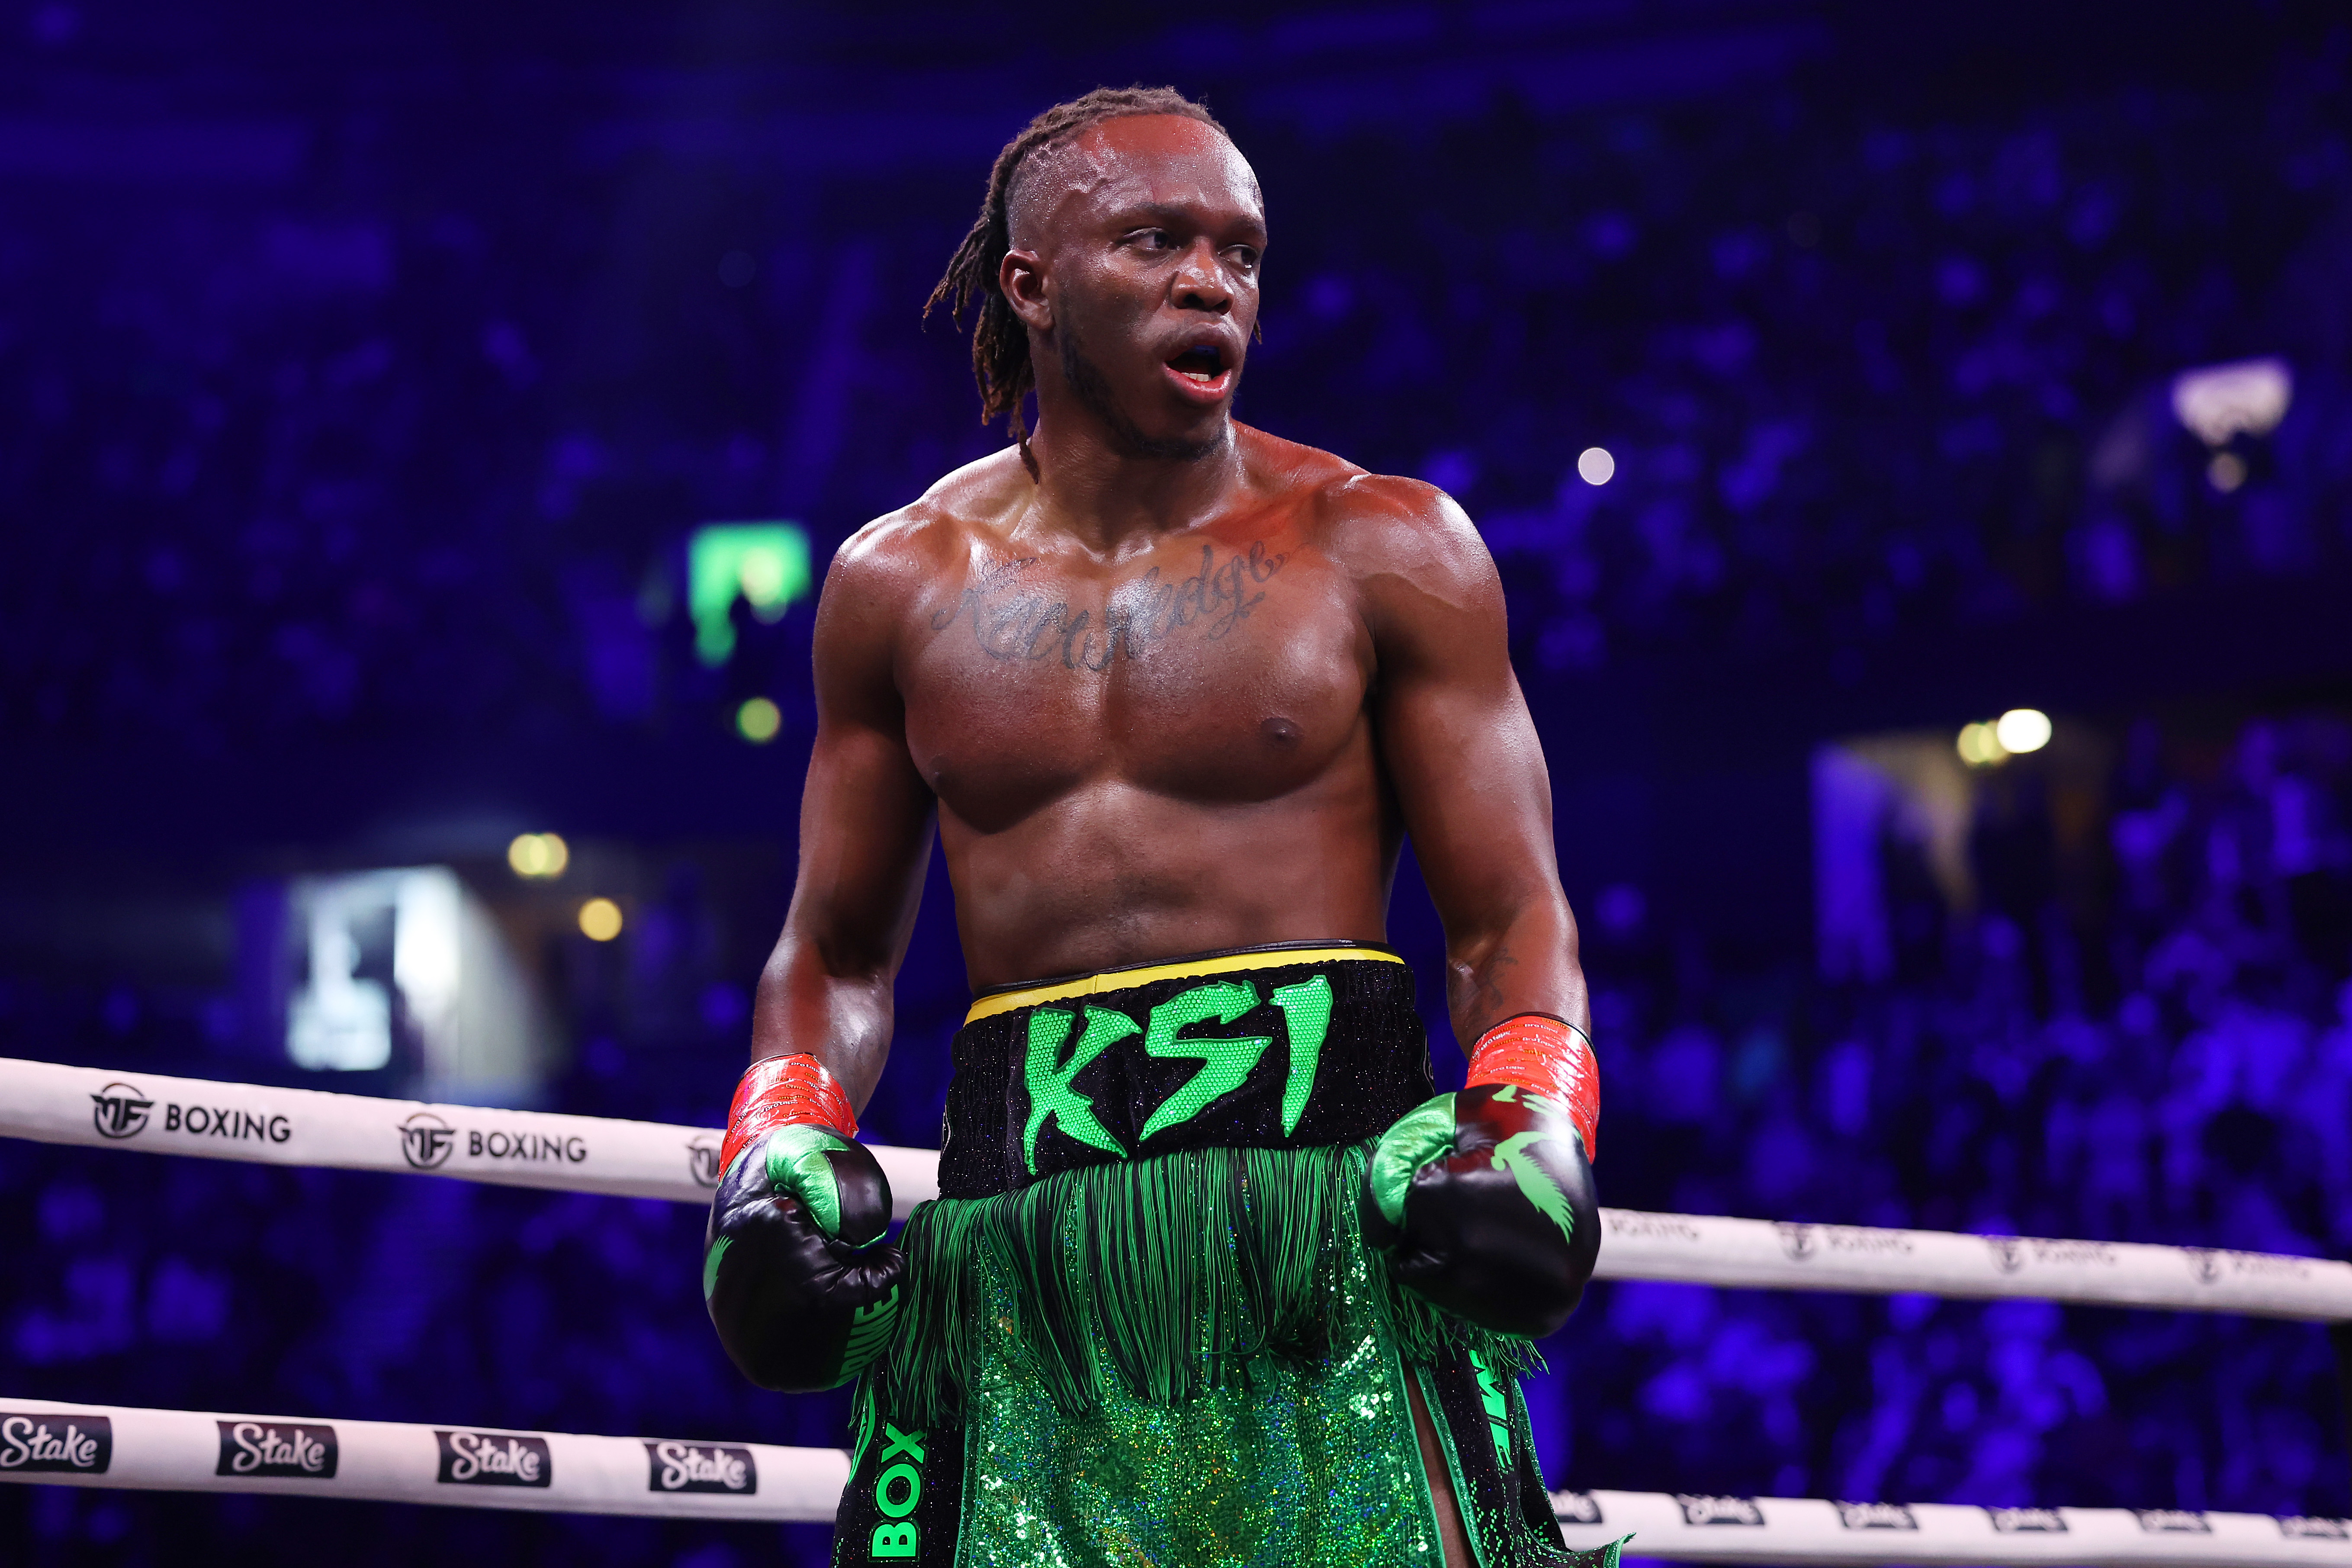 KSI and Jake Paul were mocked by Usyk